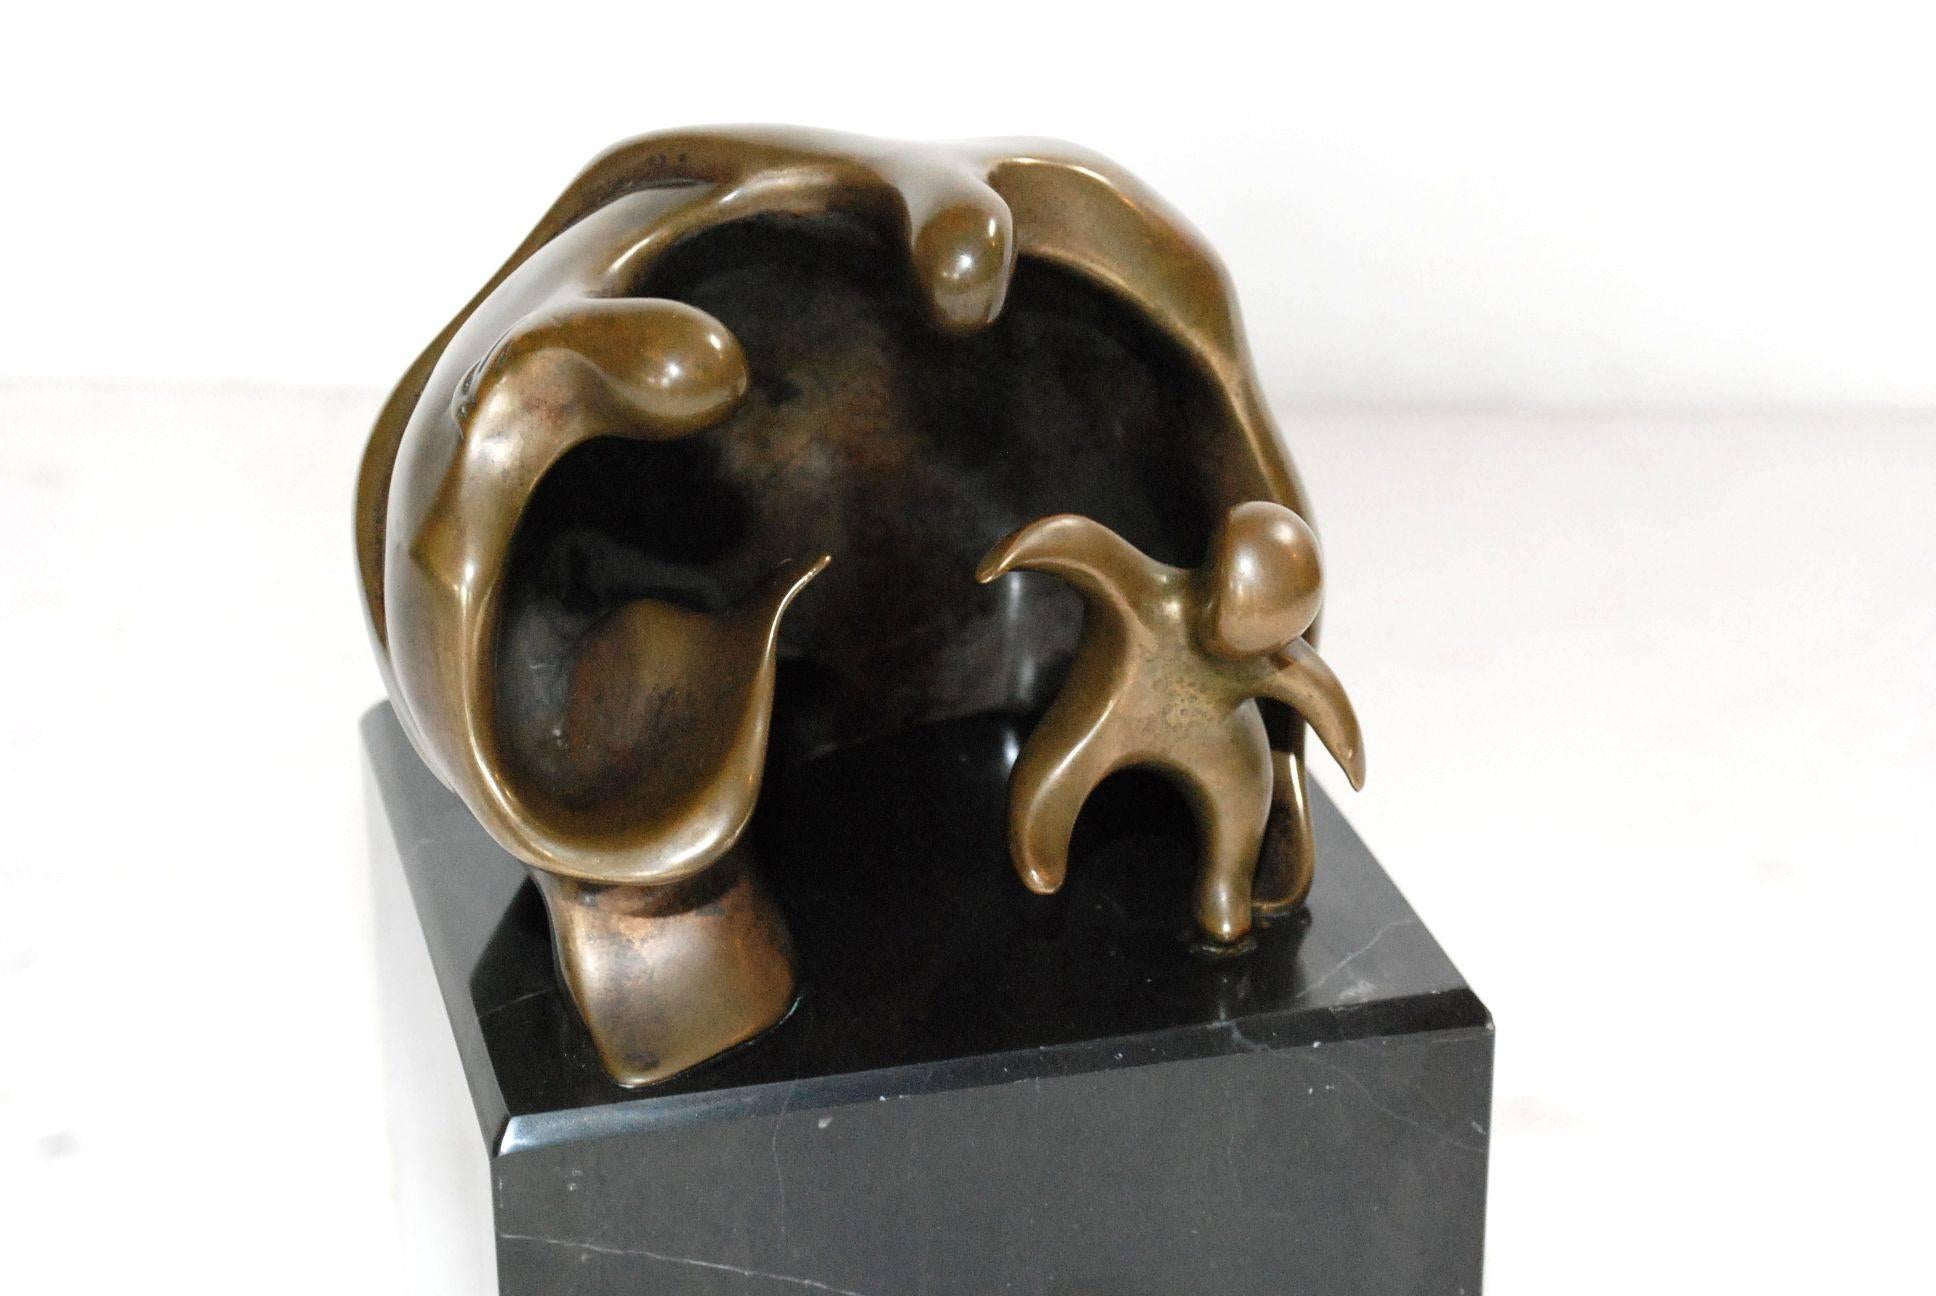 Elegant bronze on marble base sculpture signed and number 29/150 by James Menzel-Joseph, painter and sculptor. He furthered his studies at the Art Institute of Chicago and The Art Student’s League of New York. Please note slight chip on marble base